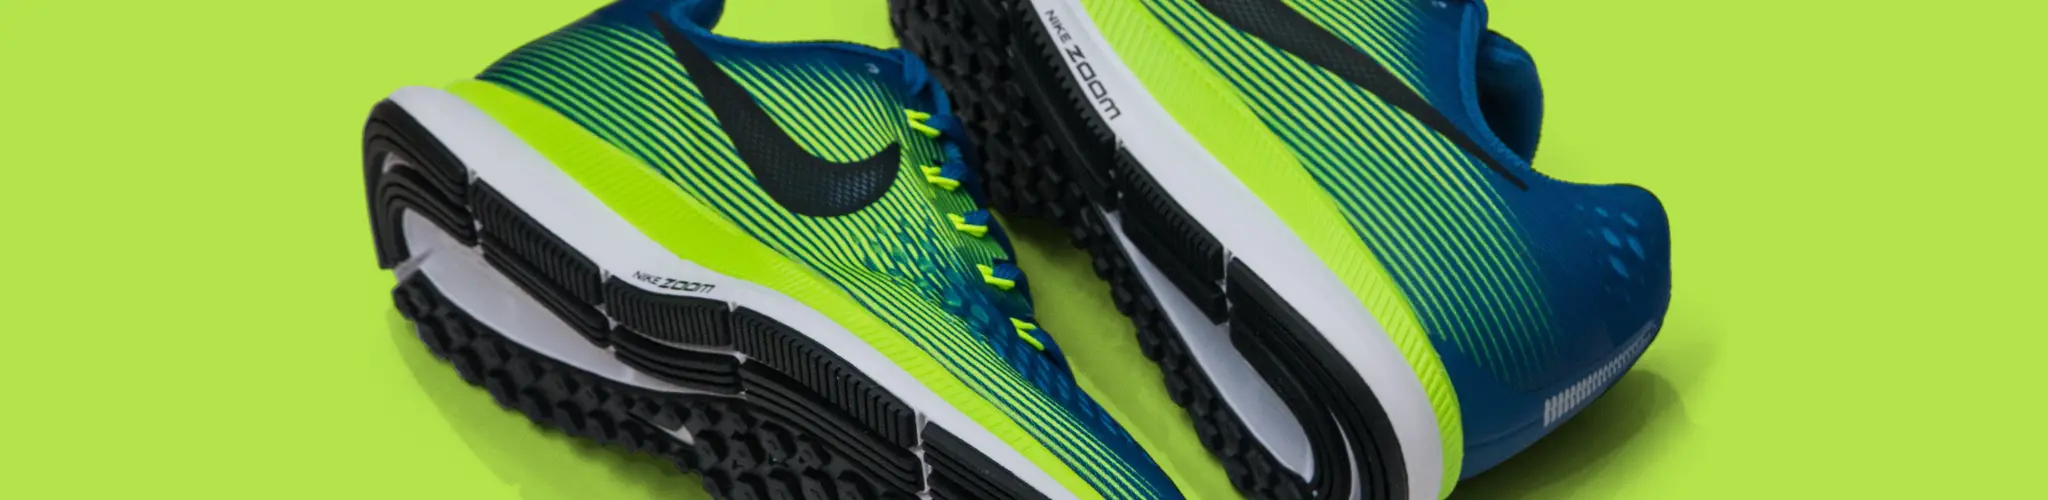 Nike basketball shoes in lime green and blue, lying on a lime-green background.